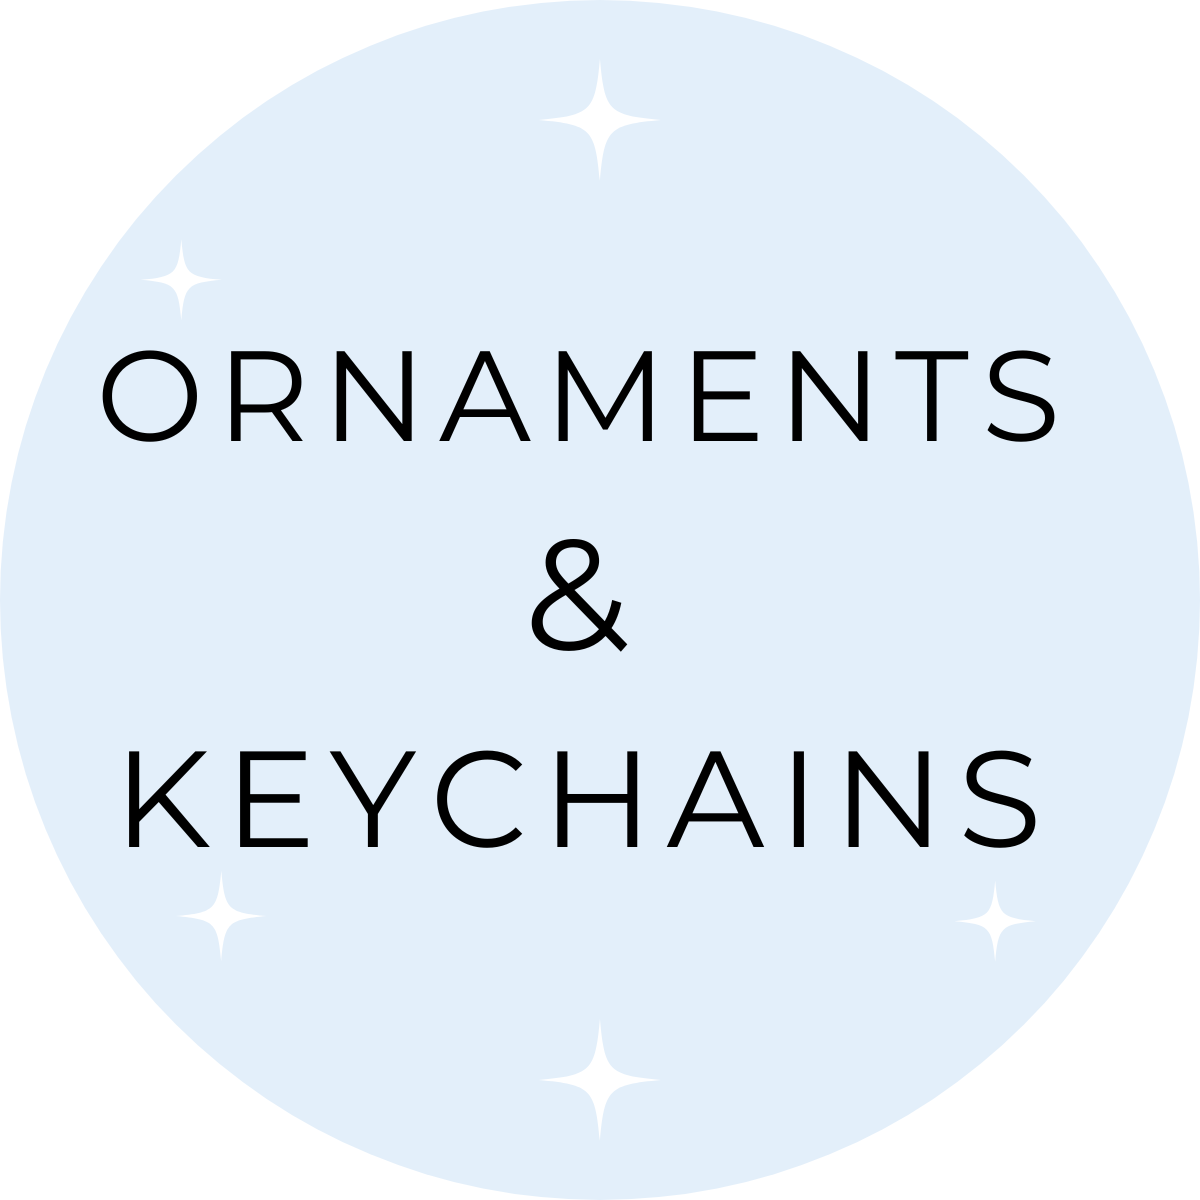 Keychains & Ornaments